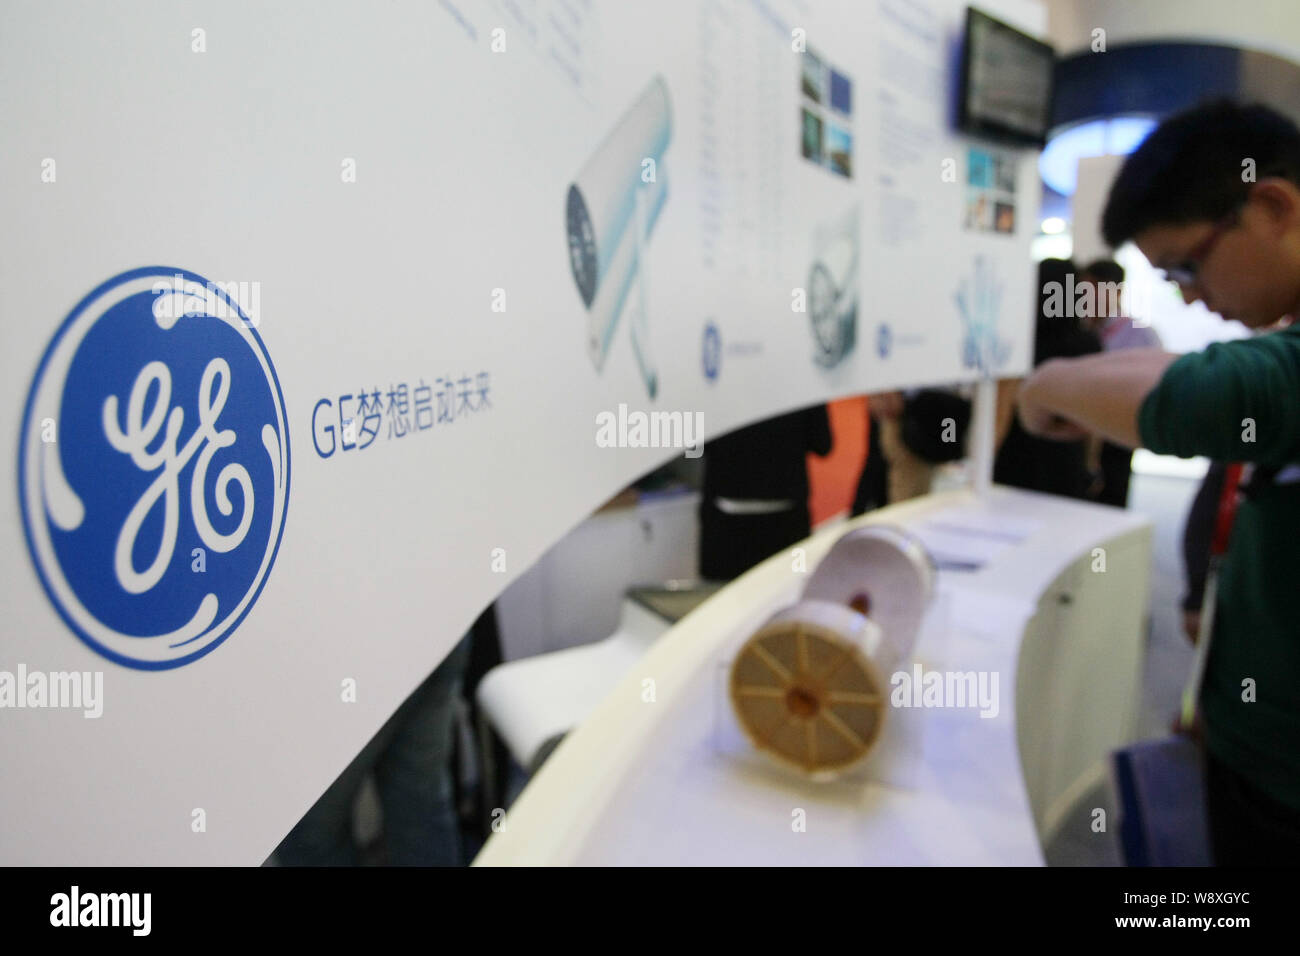 --FILE--People visit the stand of GE (General Electric) during an exhibition in Shanghai, China, 5 June 2013.   General Electric Co.'s China head expe Stock Photo